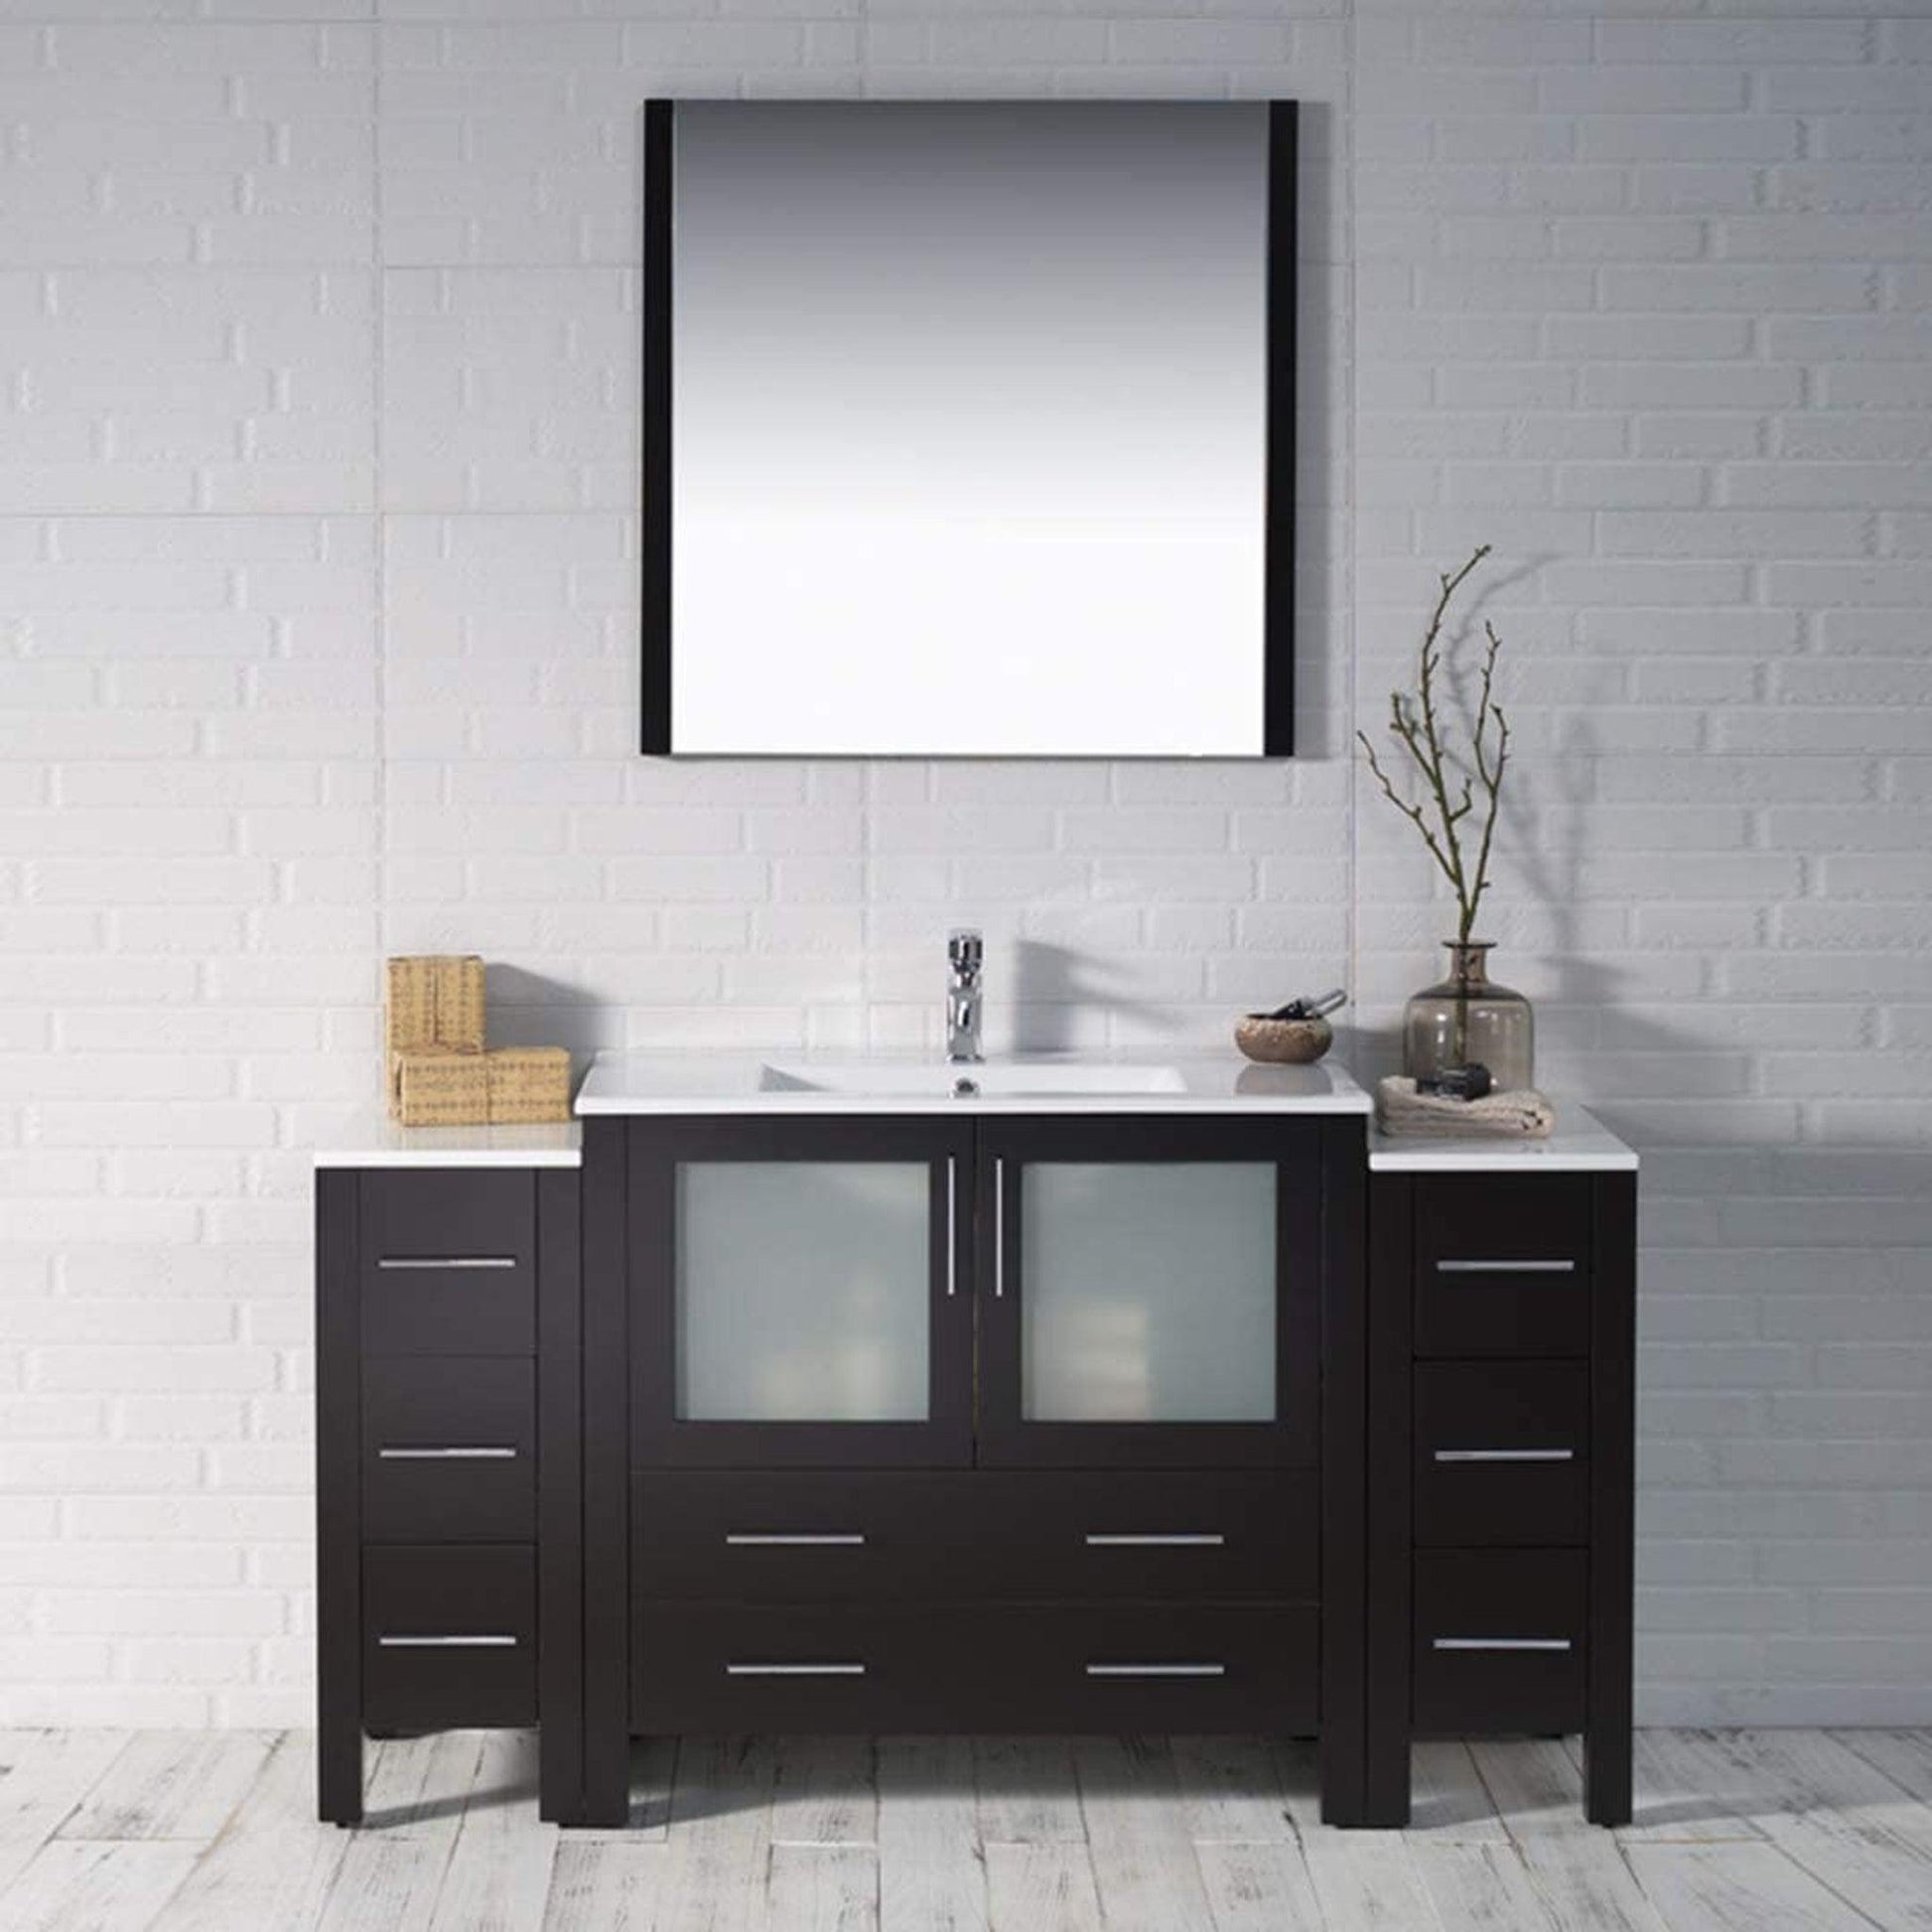 Blossom Sydney 60" Espresso Freestanding Vanity Set With Integrated Double Sink Ceramic Top, Mirror and Two Side Cabinet